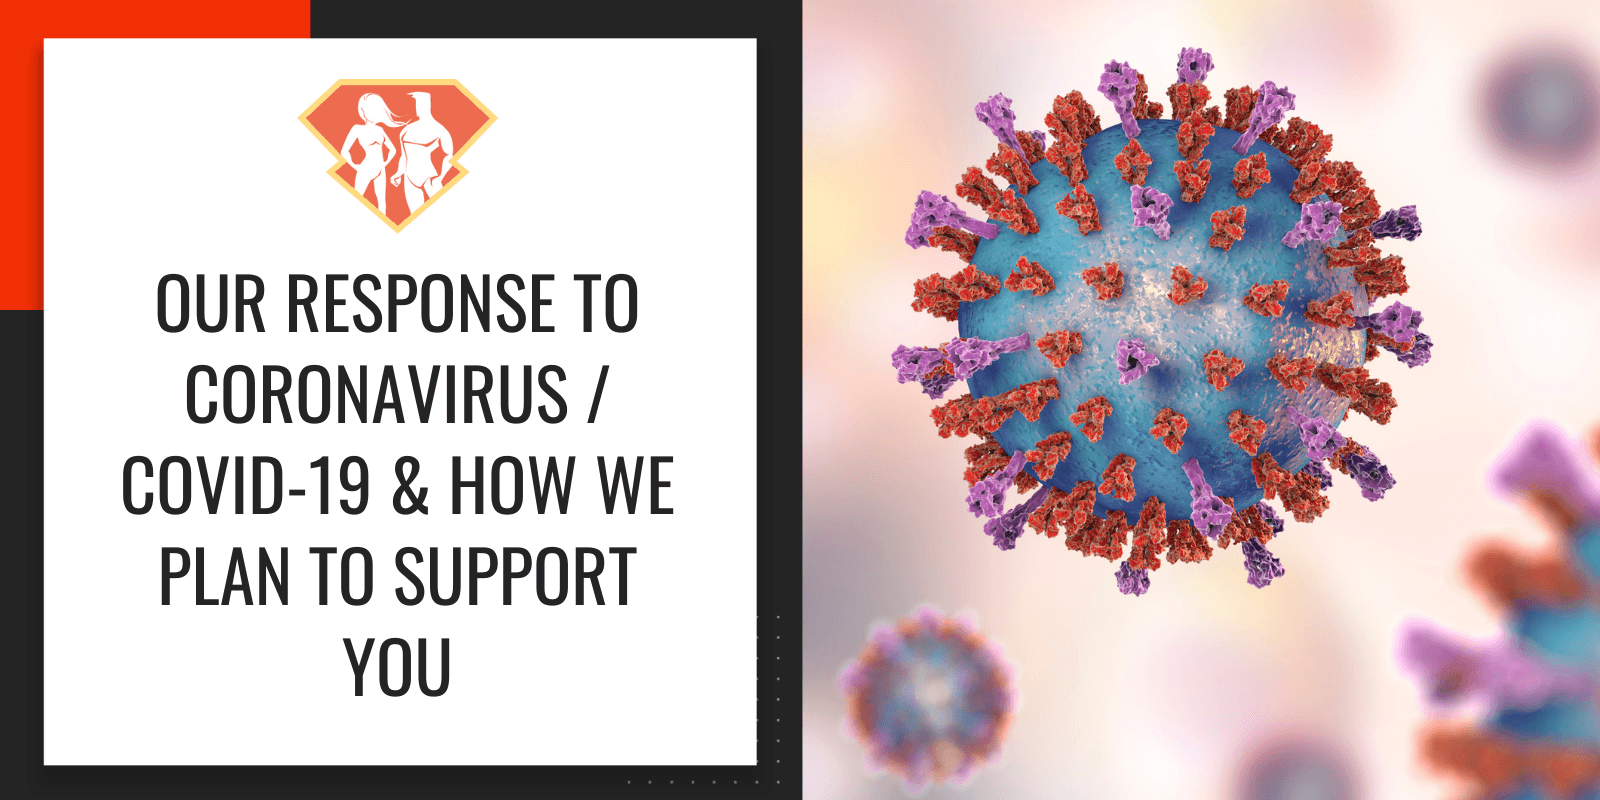 Our Response To Coronavirus / COVID-19 & How We Plan To Support You